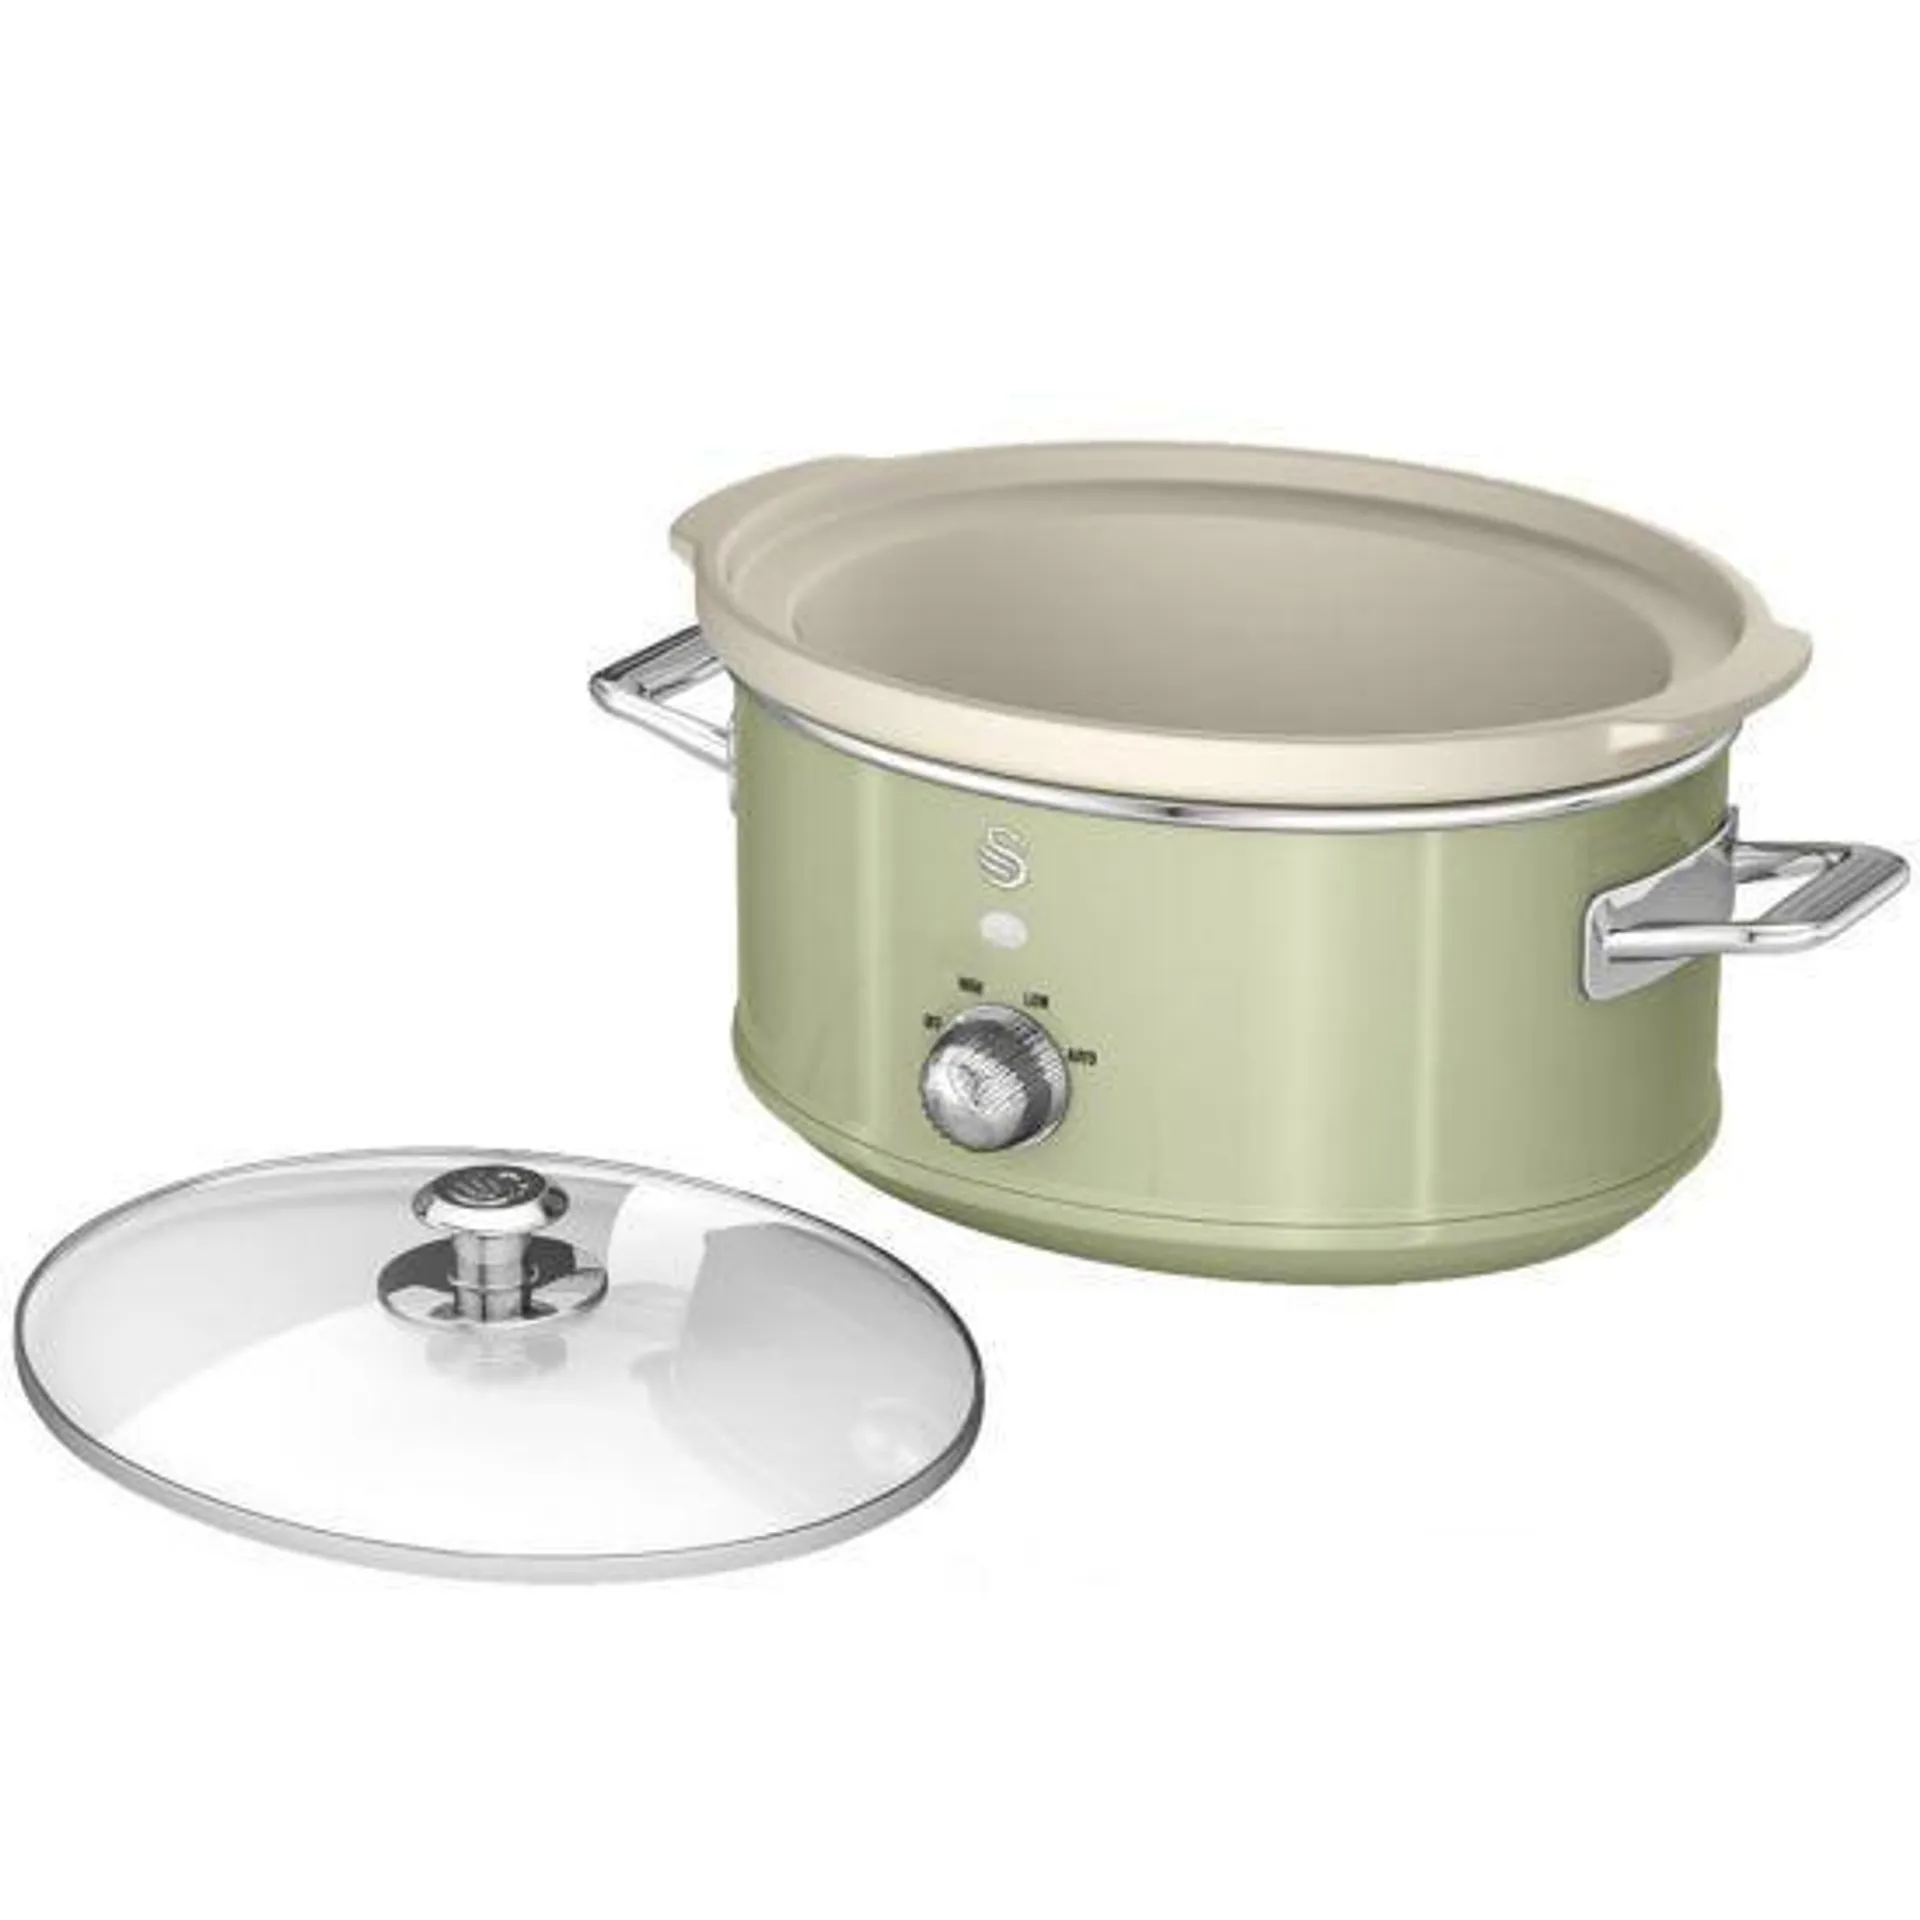 Swan SF17021GN 3.5L Retro Slow Cooker - Green